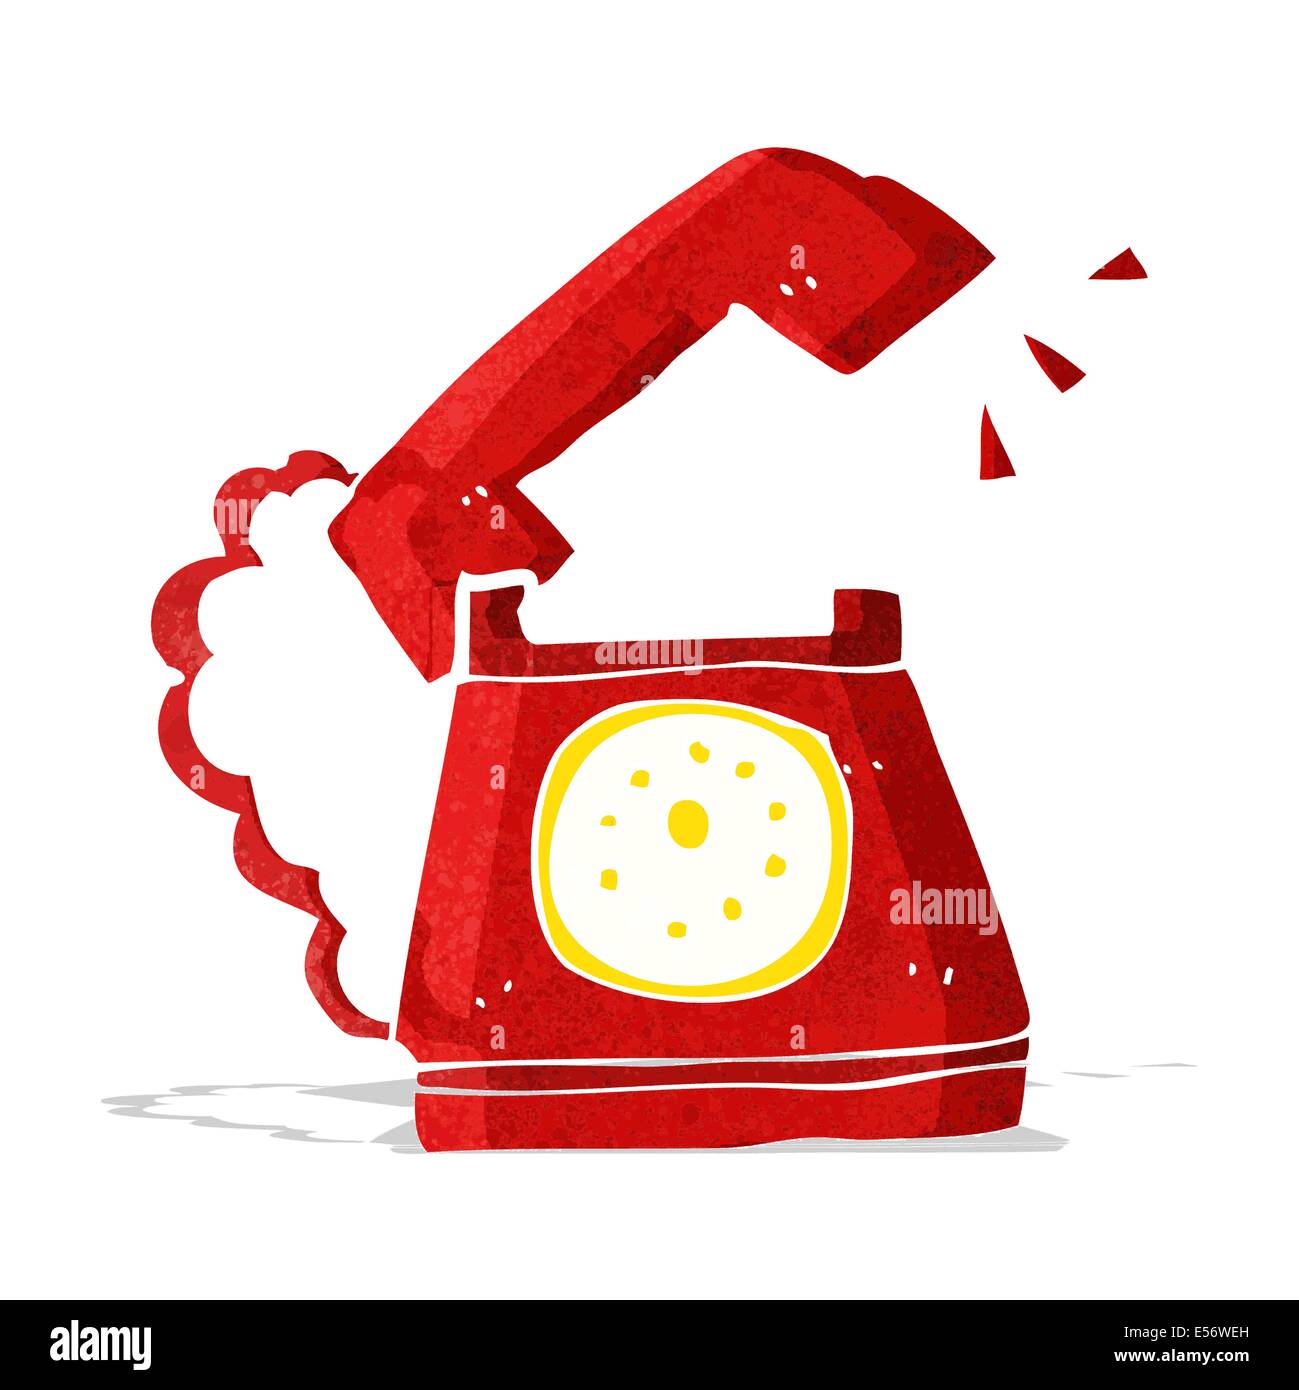 Cartoon ringing telephone Banque d'images vectorielles - Page 2 - Alamy